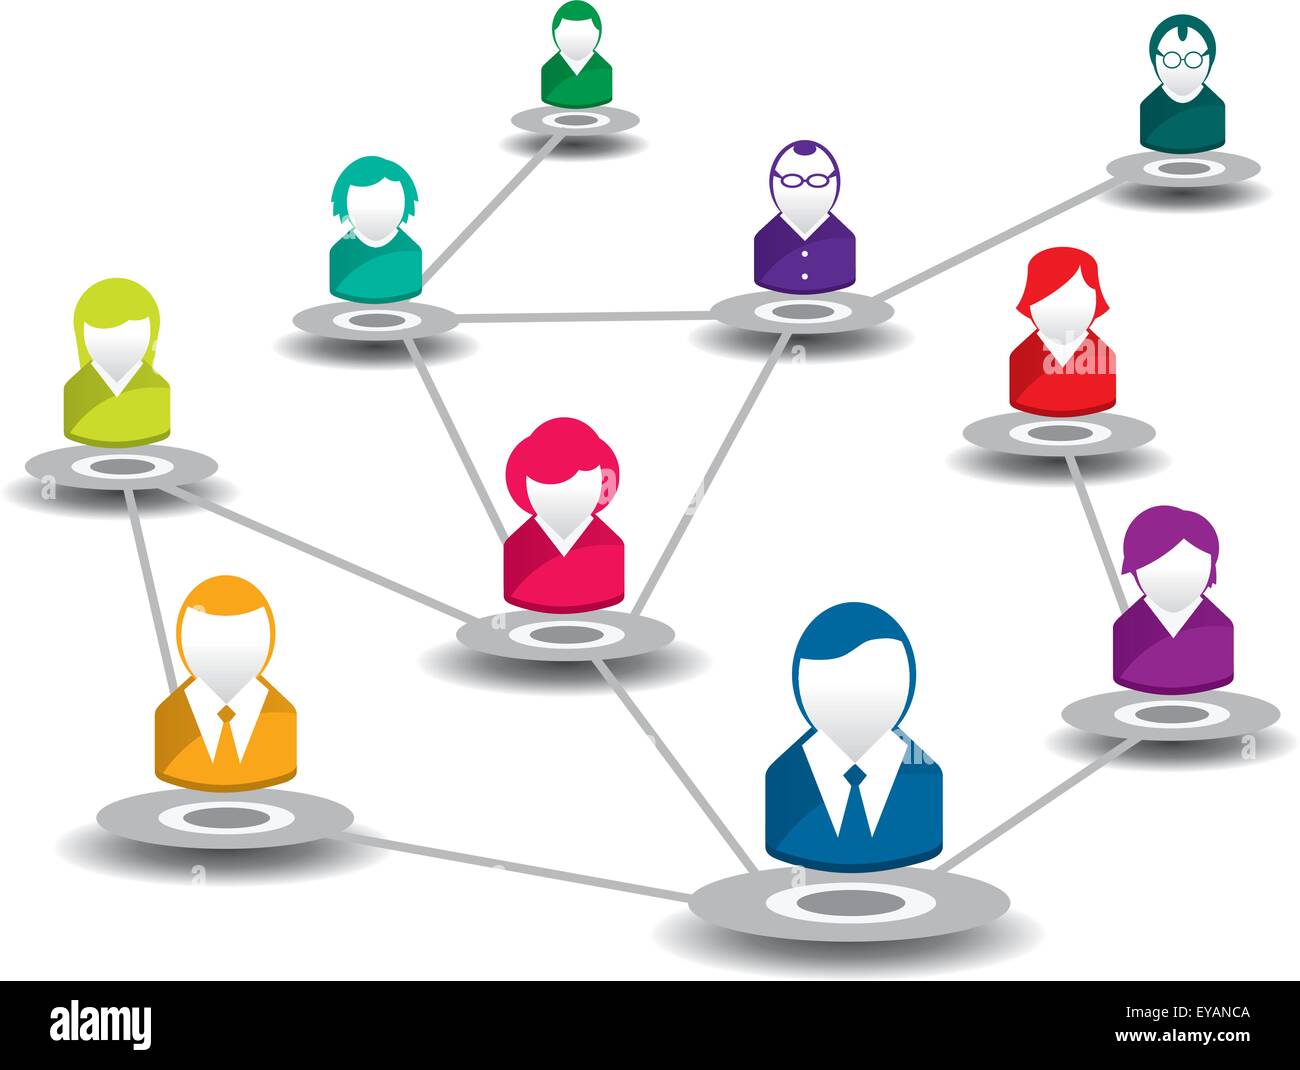 vector illustration of people in a social network Stock Vector